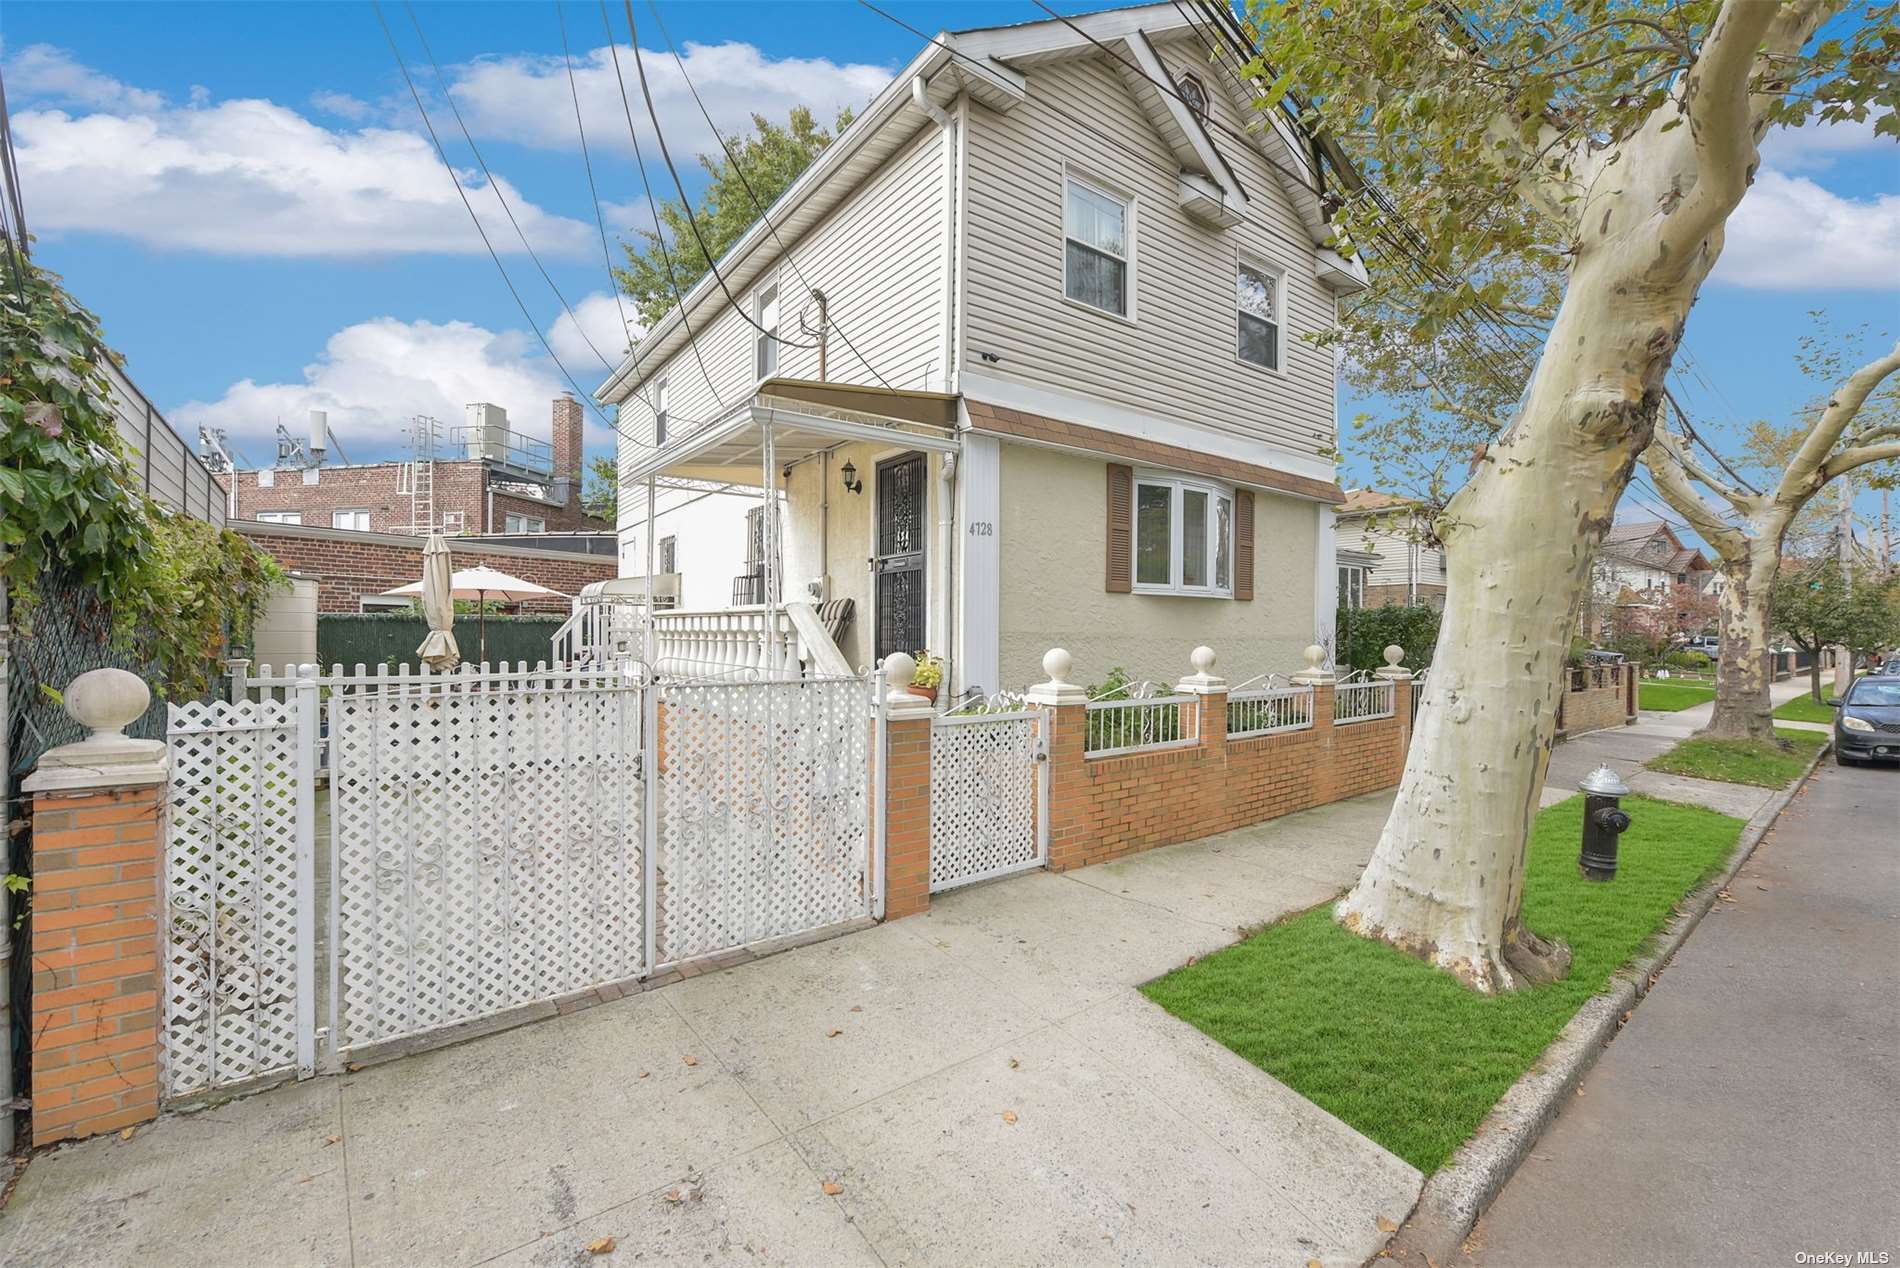 Single Family in Bayside - 204th  Queens, NY 11361